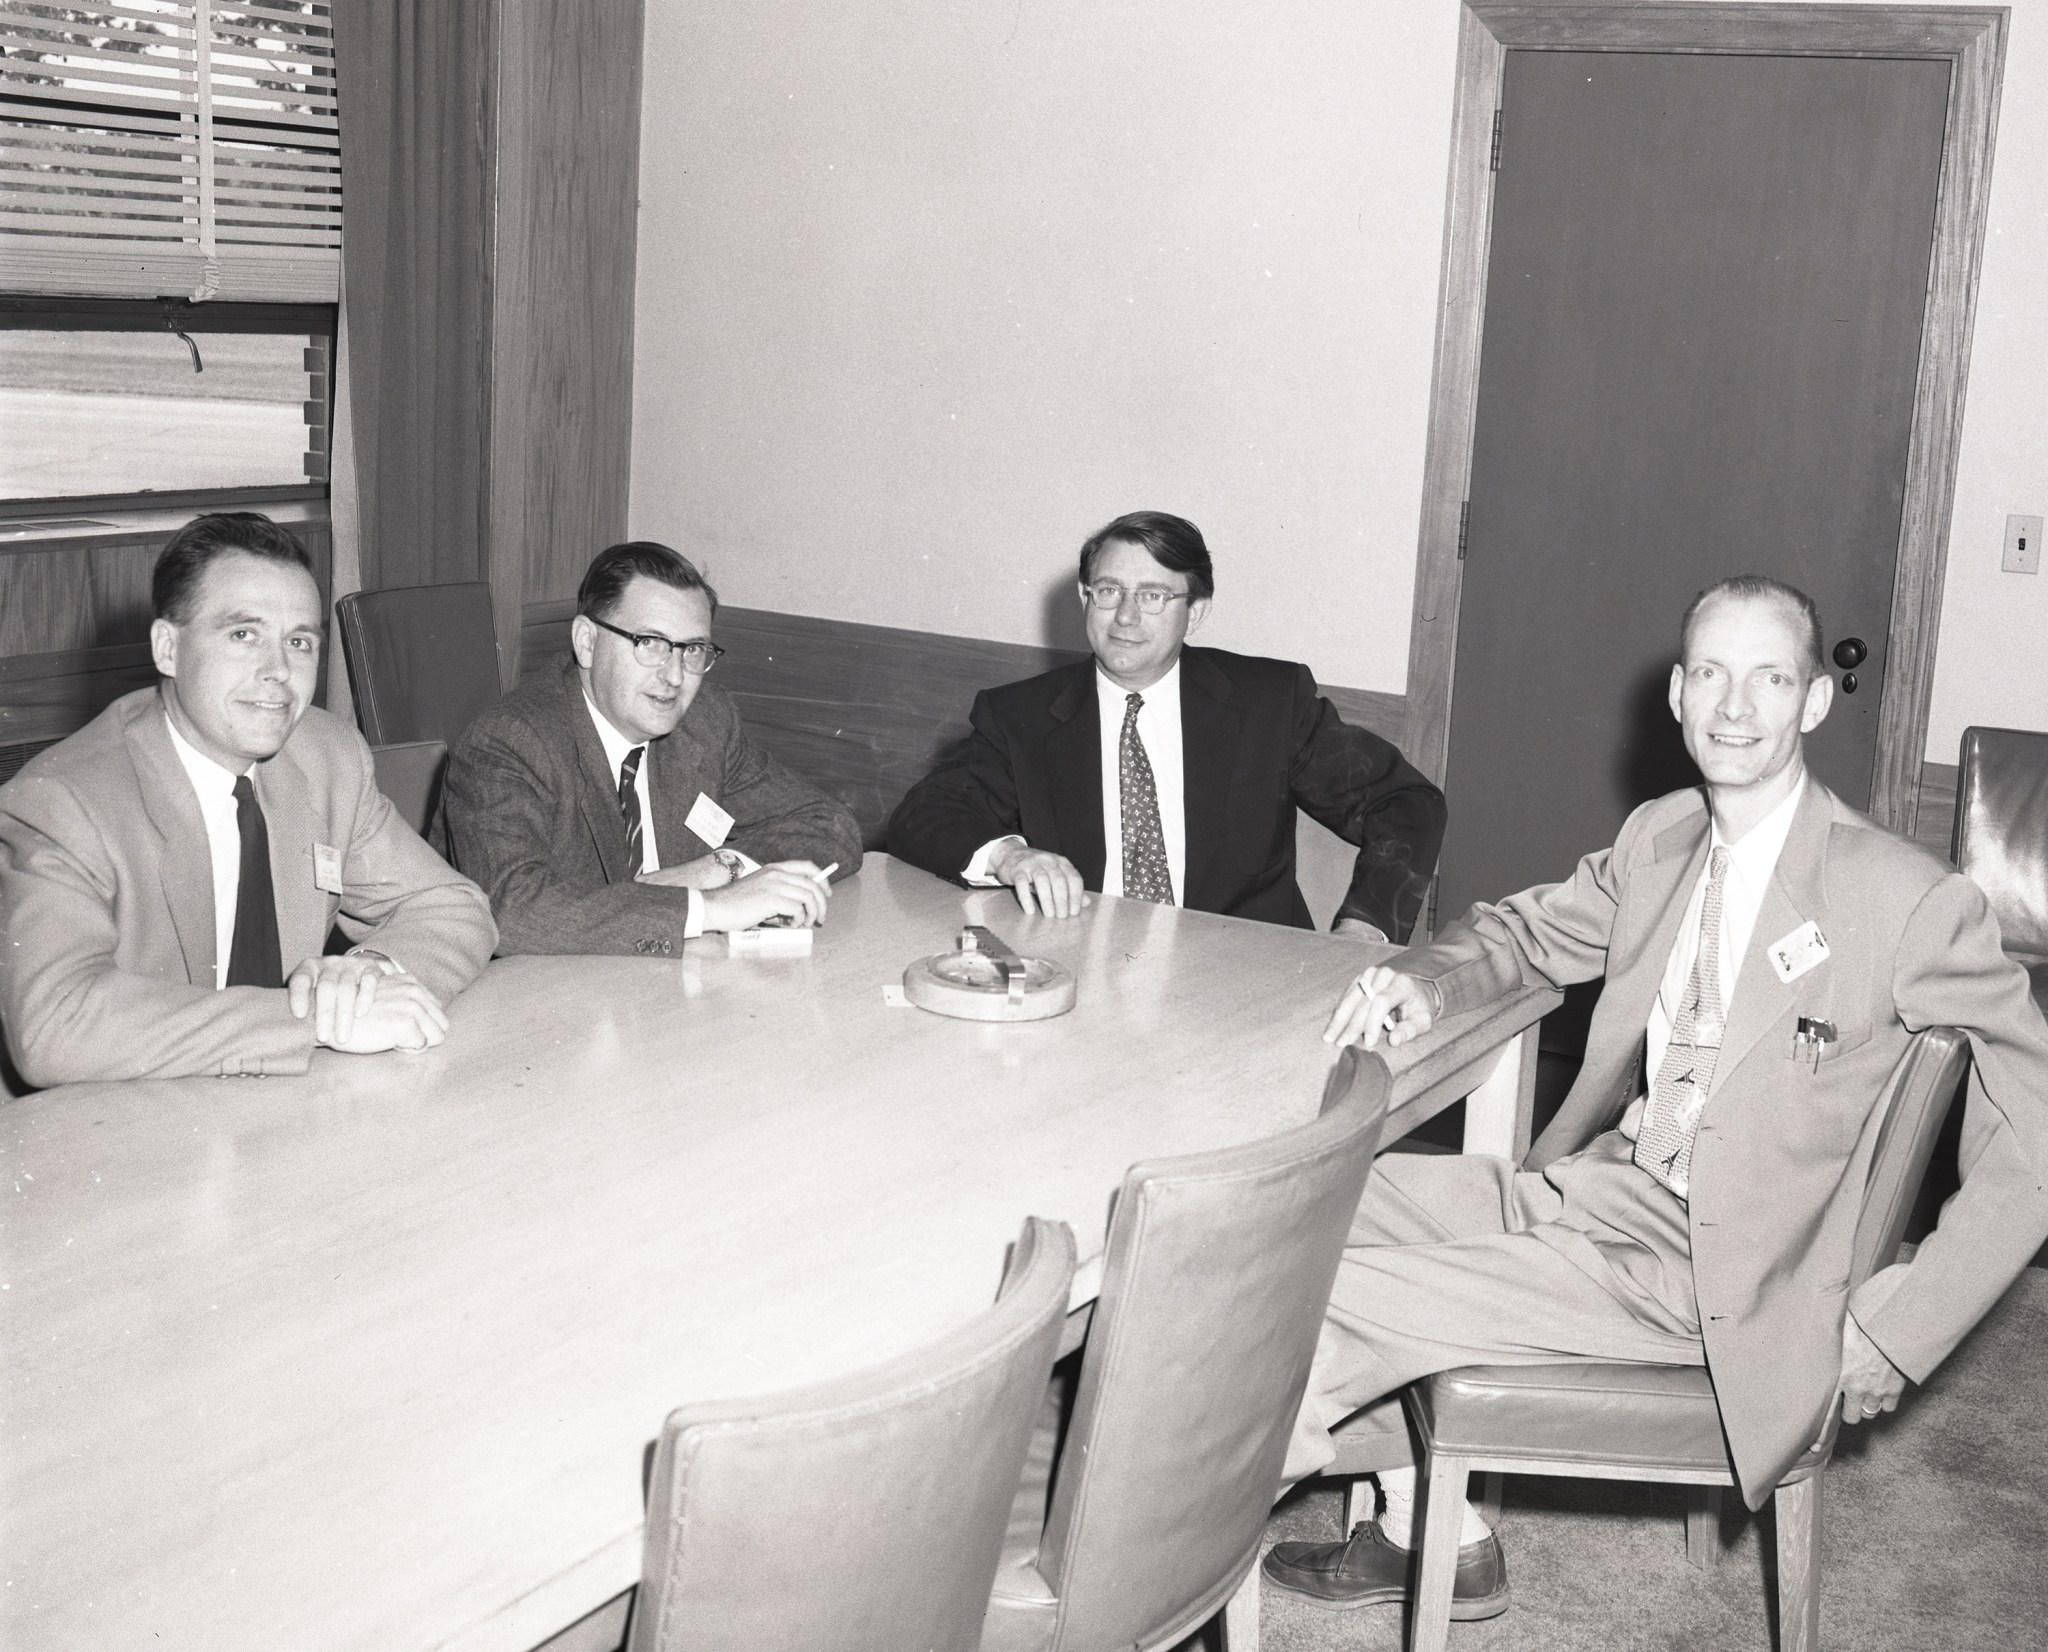 Four men seated at conference table.